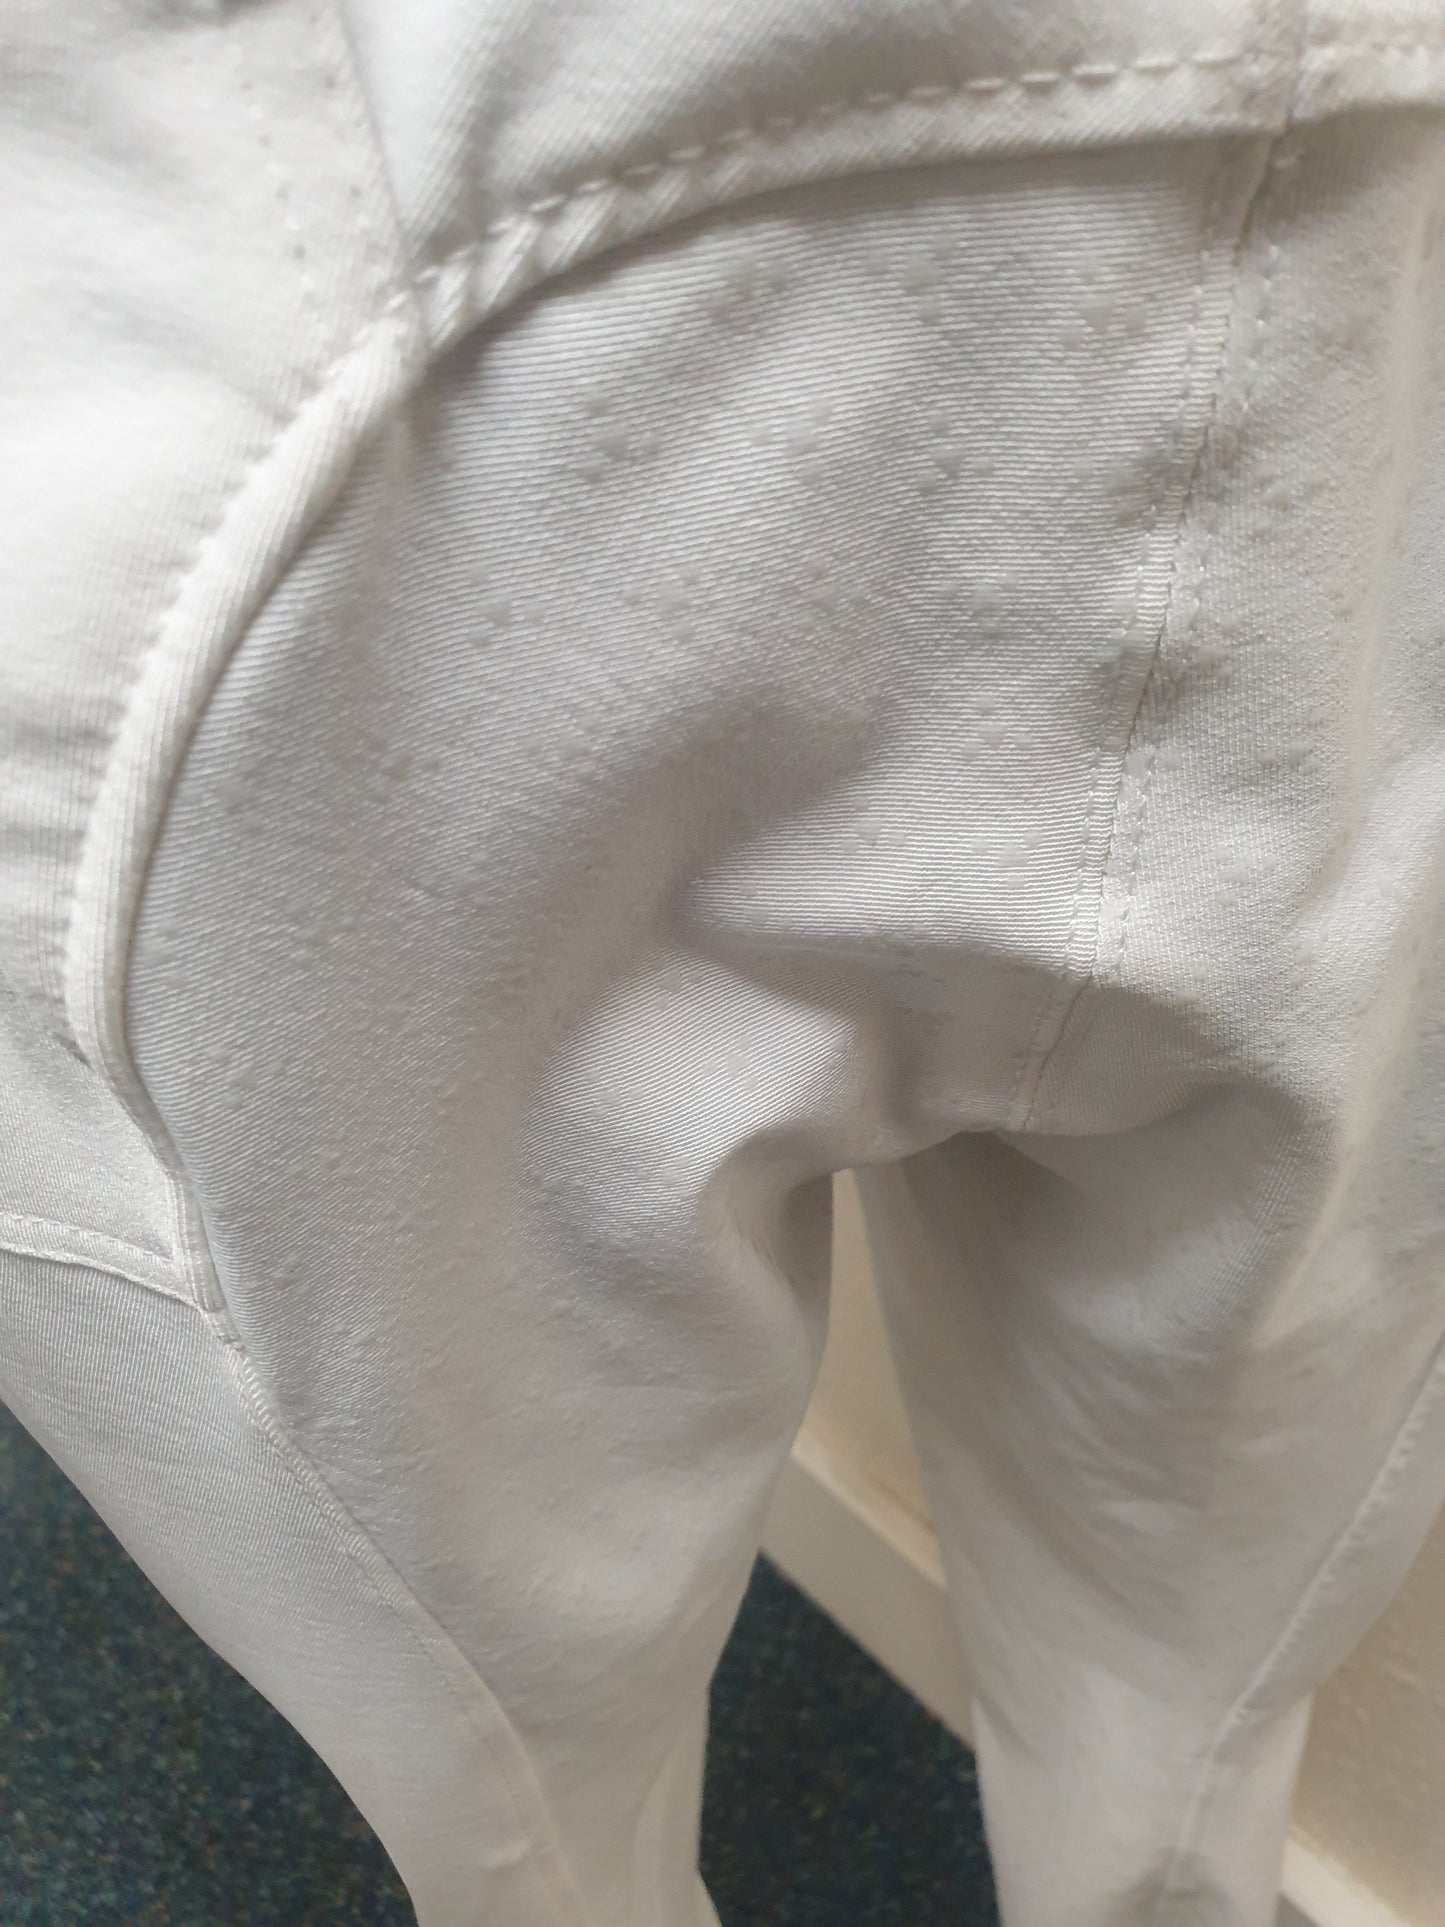 💥NEW💥  HKM white Breeches with relfective trim  FREE POSTAGE  🟢